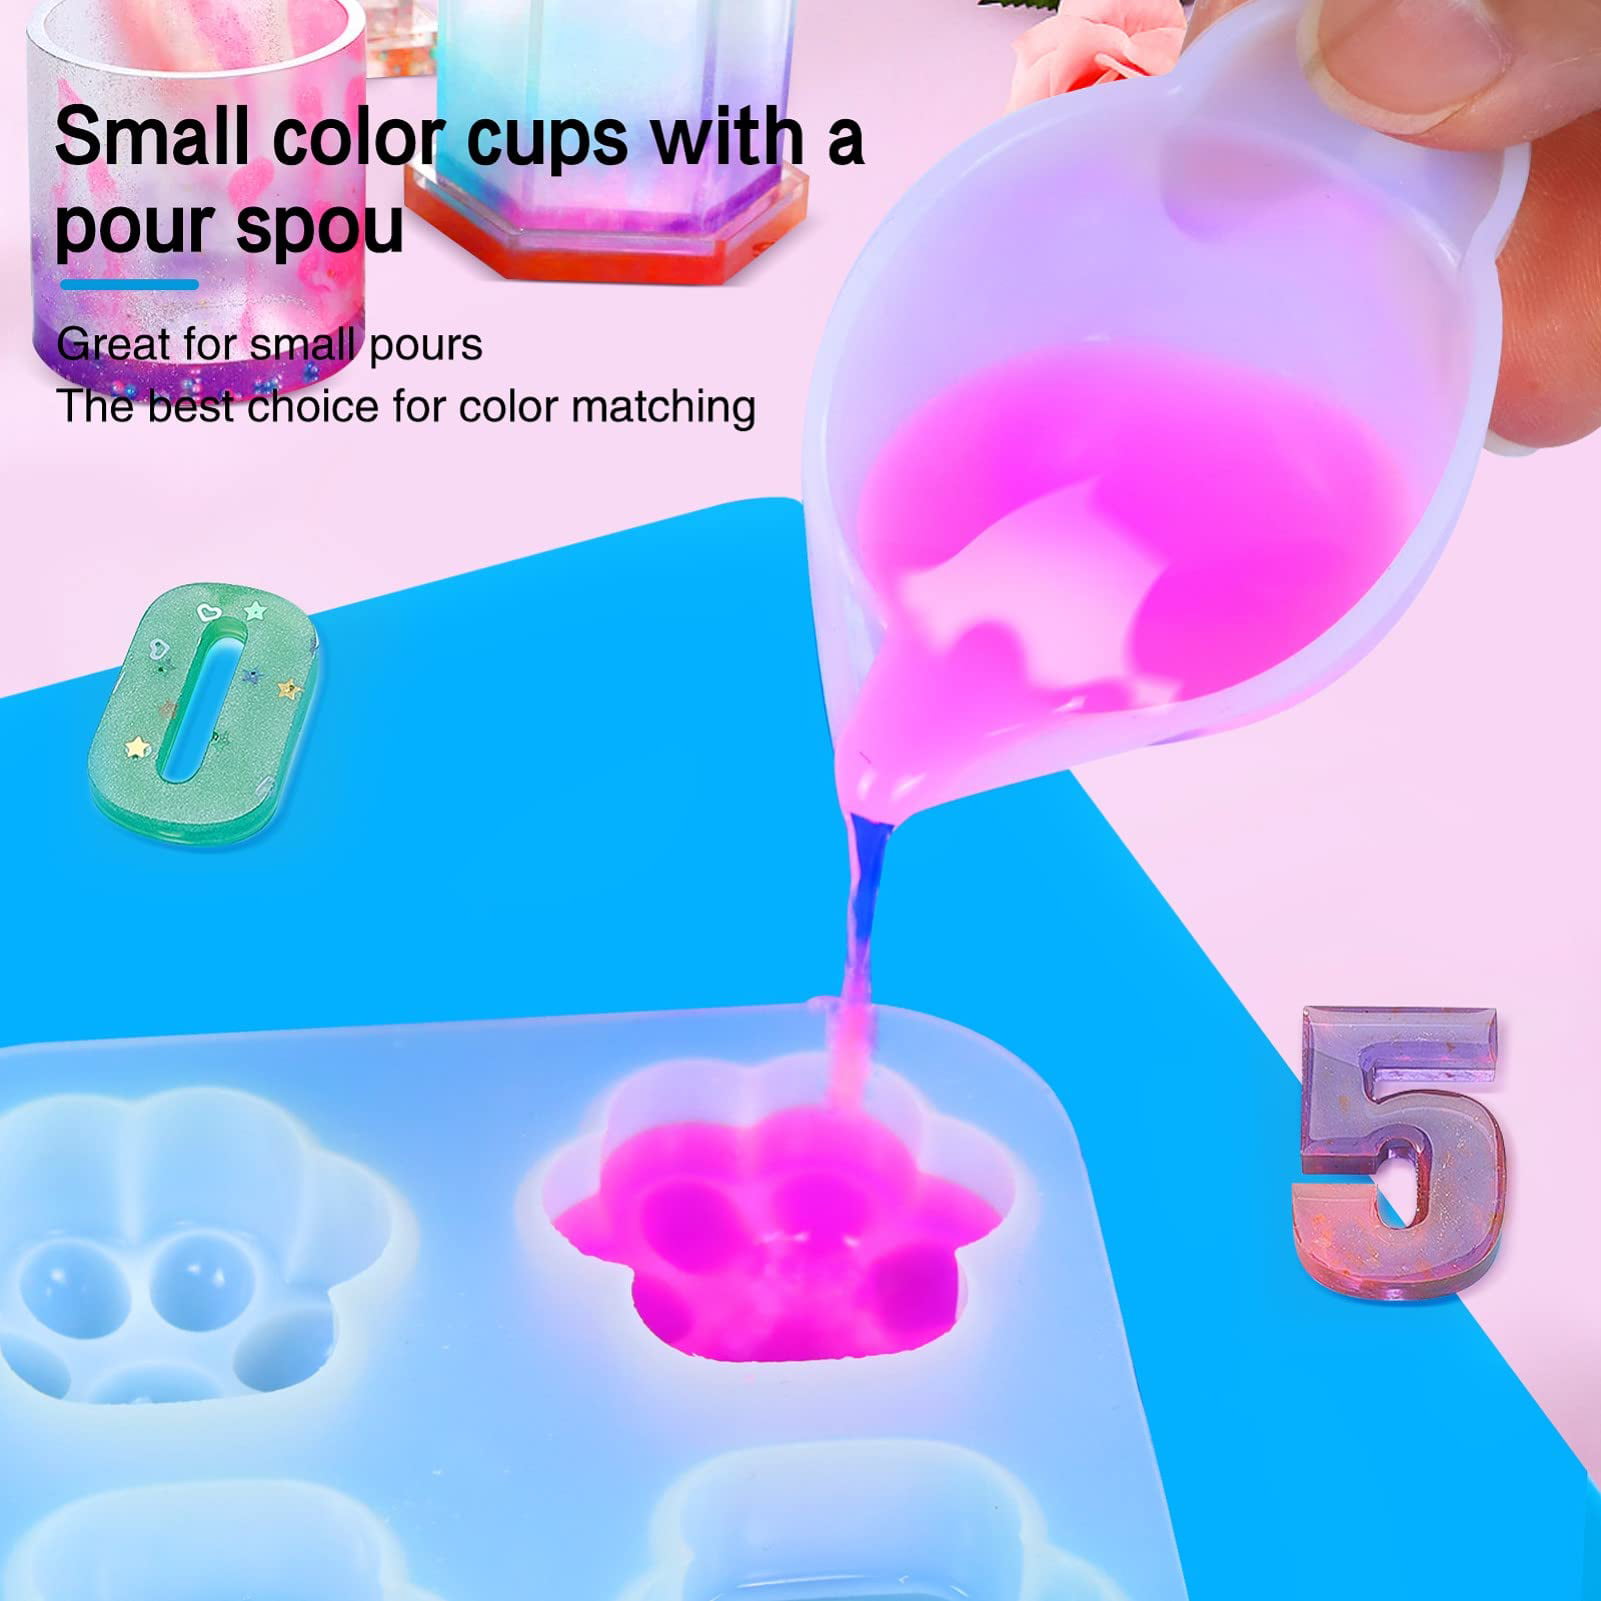 CRAVERLAND Silicone Measuring Cups Resin Molds Tools Kit for Epoxy Resin,100ml Resin Supplies Molds Cups Mixing Measuring Supplies Jewelry Making(12 Pack)